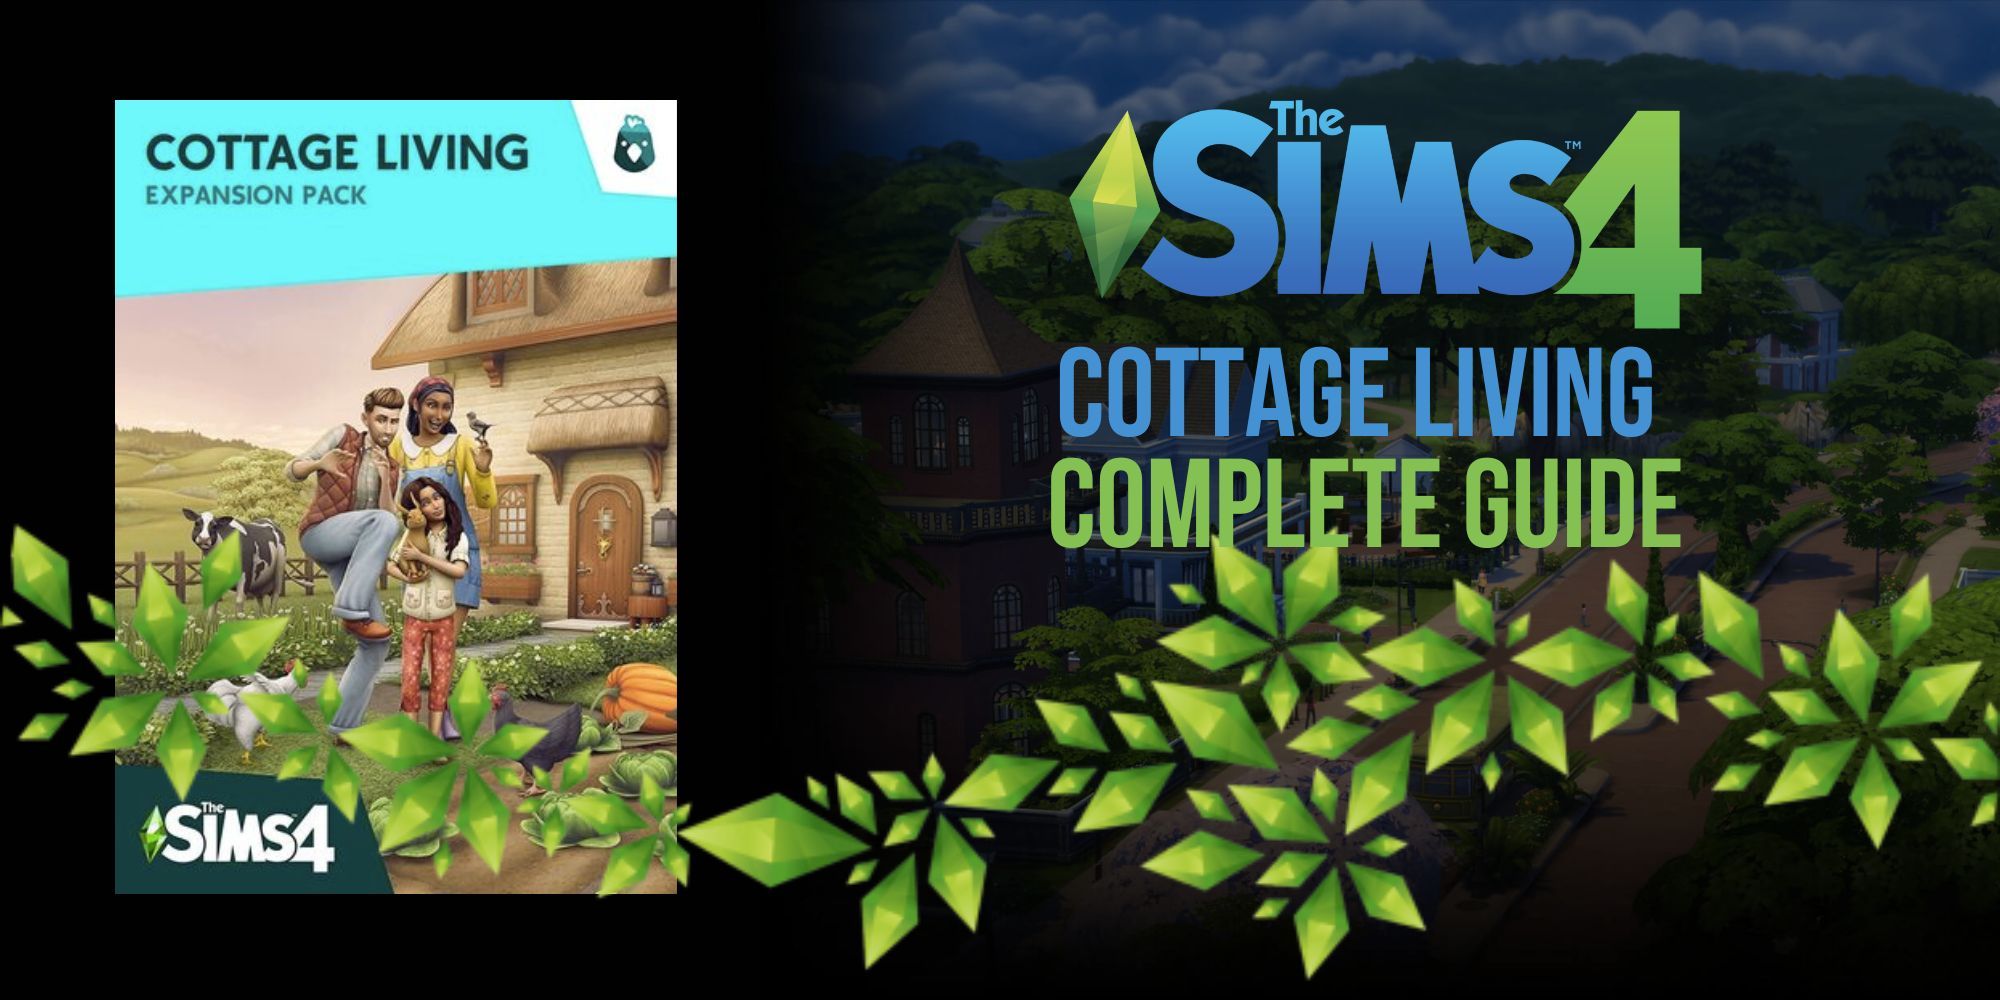 The Sims 4 Cottage Living Complete Guide